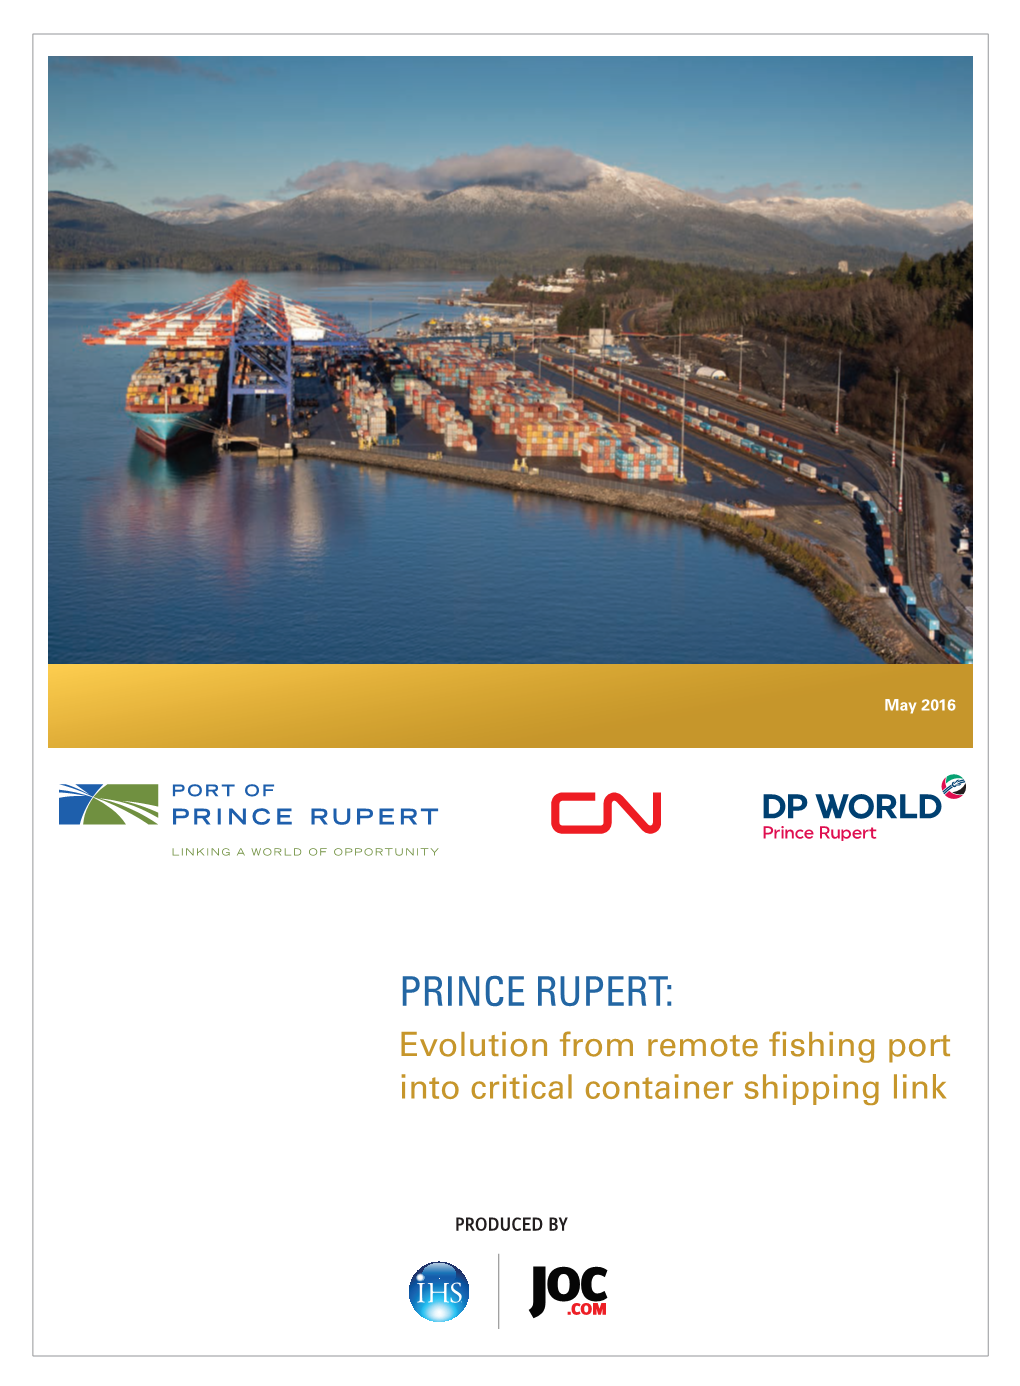 PRINCE RUPERT: Evolution from Remote ﬁshing Port Into Critical Container Shipping Link